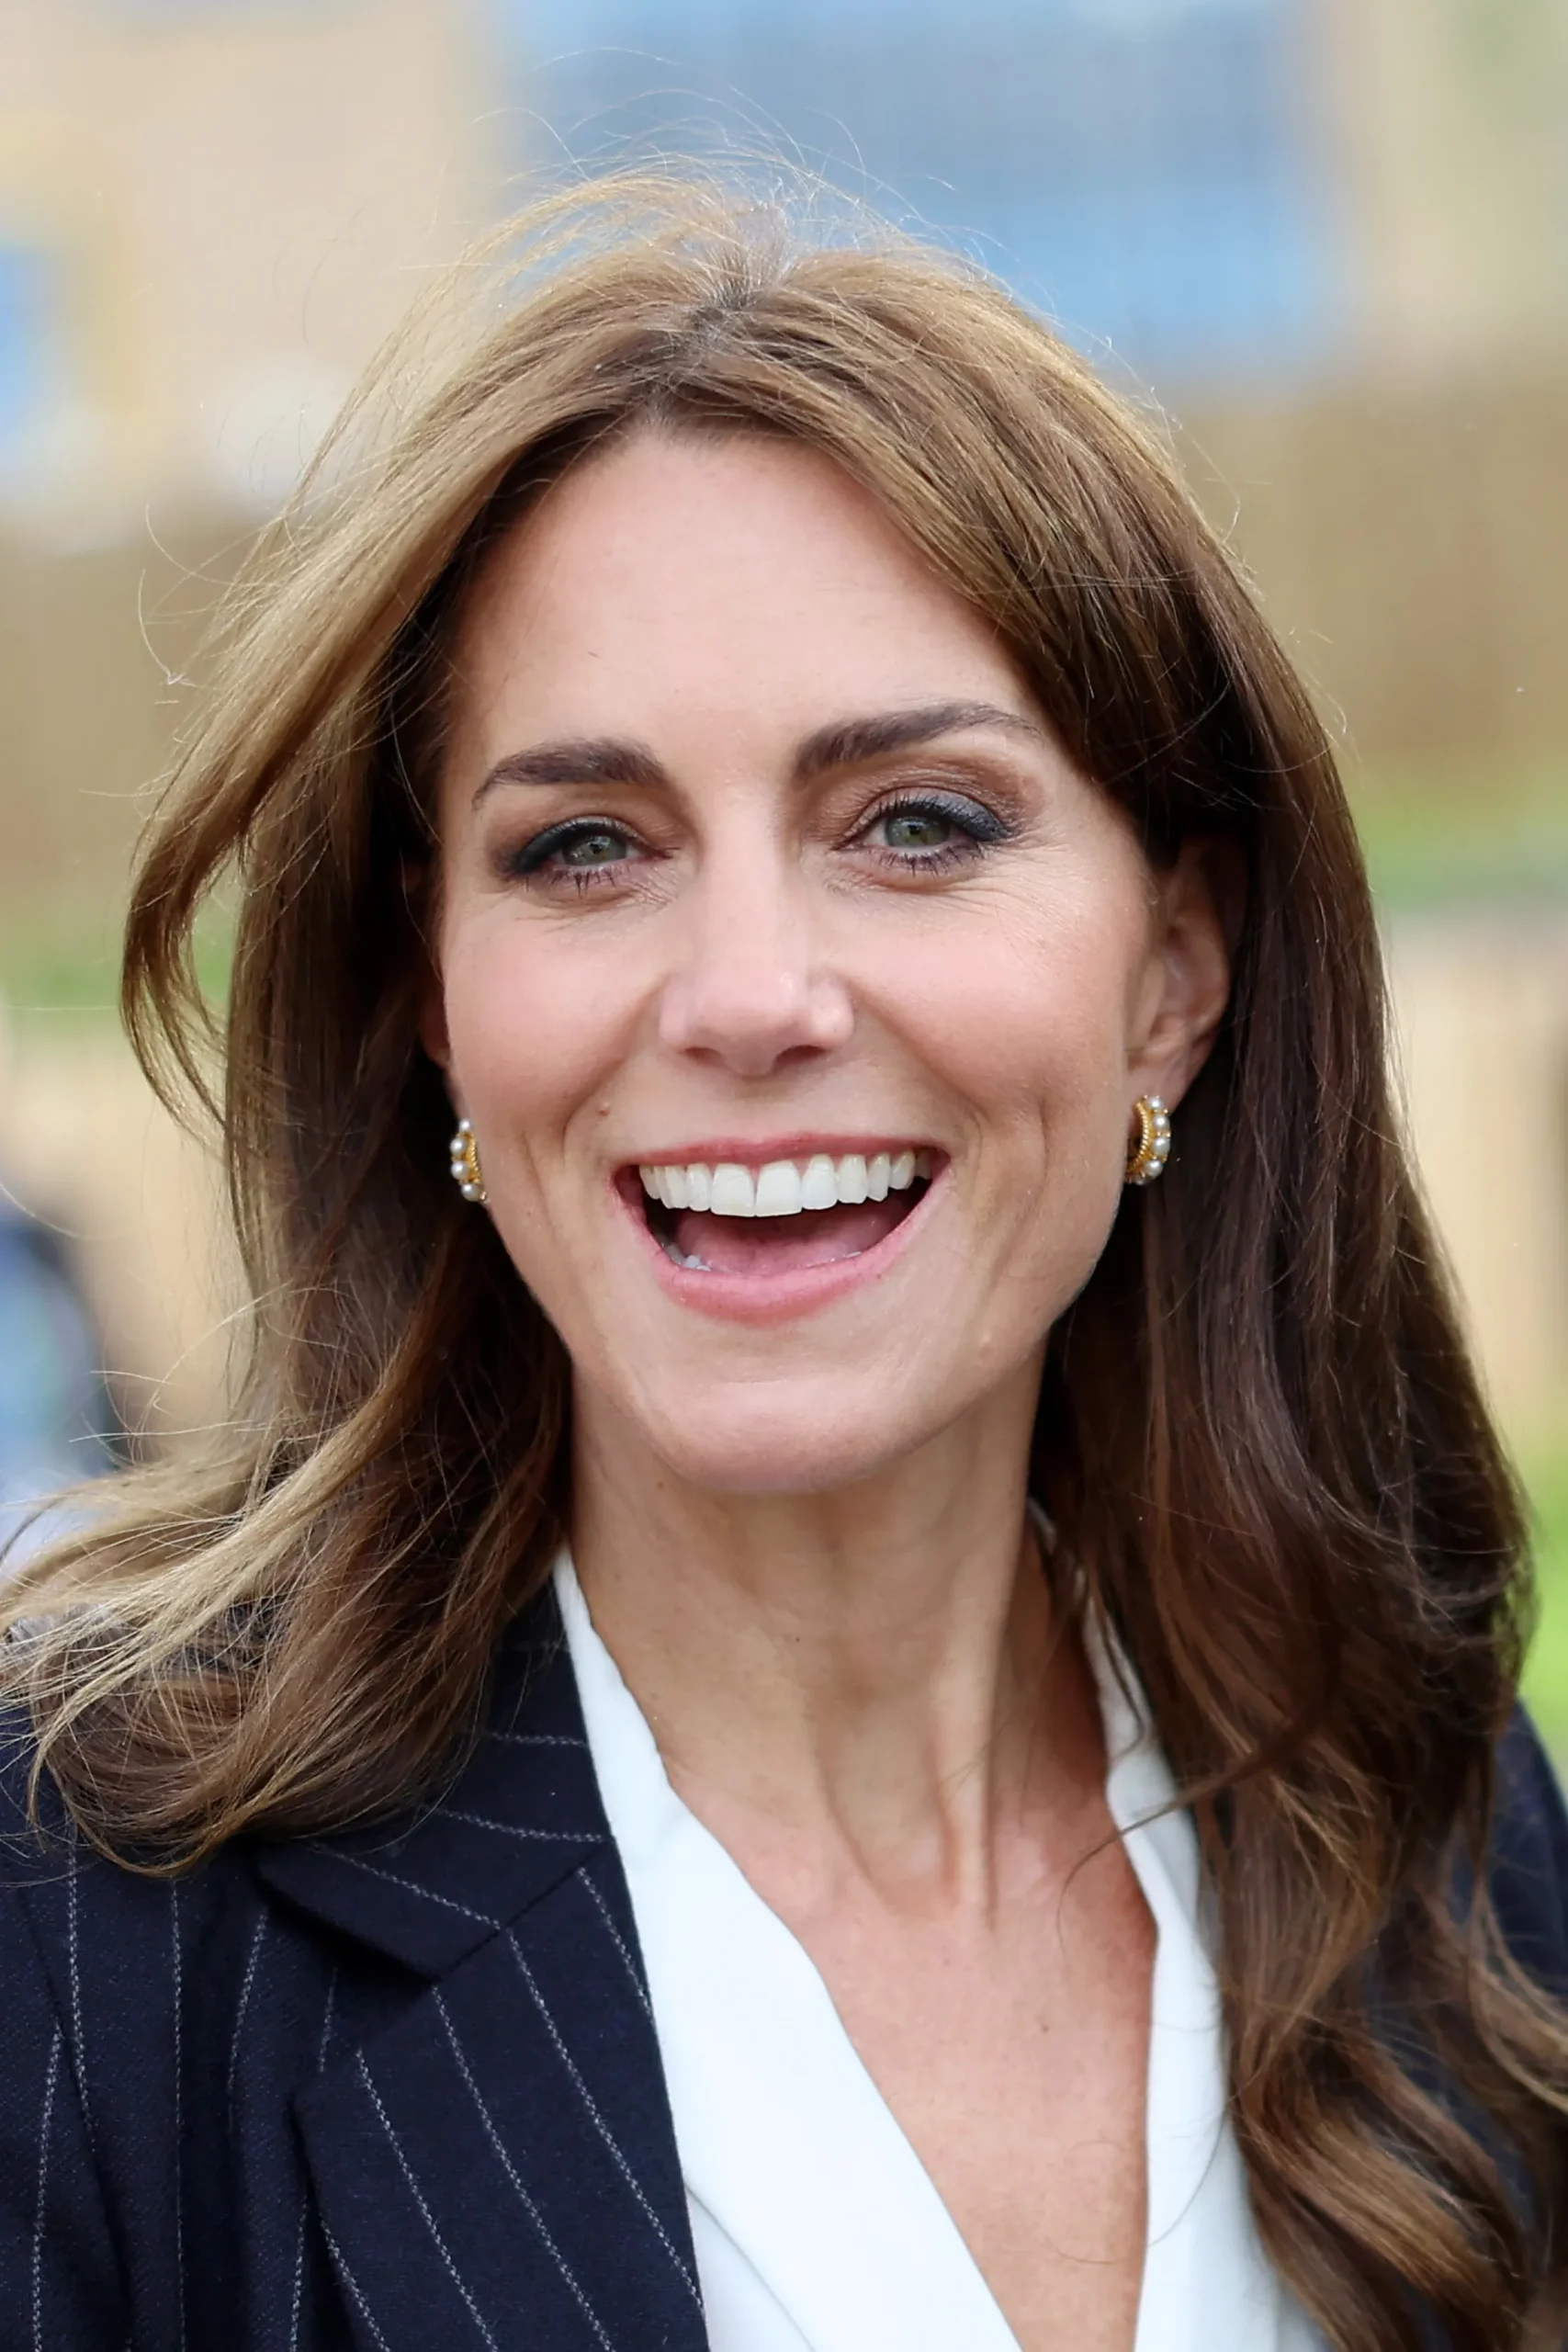 Kate Middleton Spotted In Rare Public Sighting With Family Since ...